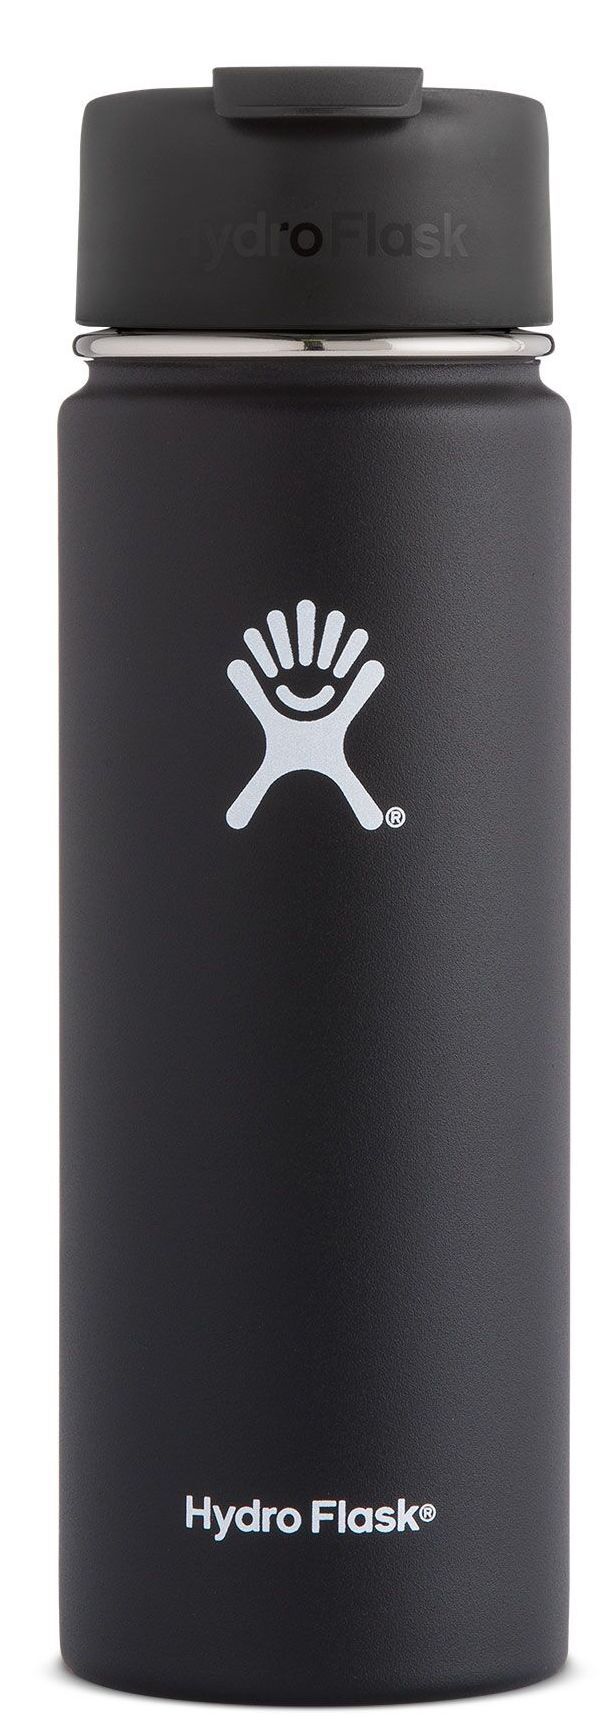 Hydro Flask 20 oz Wide Mouth - Vacuum flask